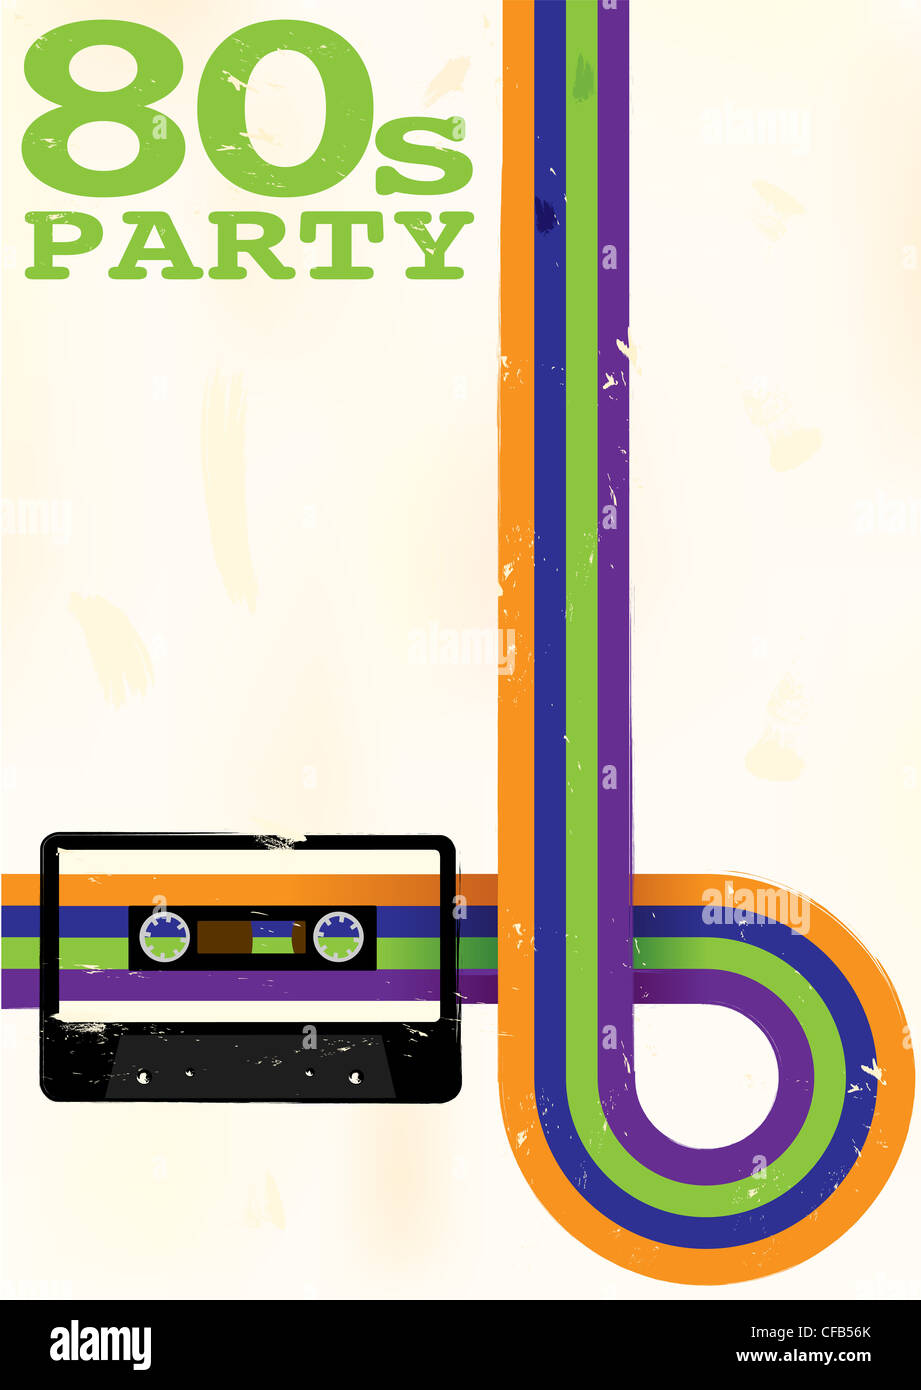 Retro Poster - 80s Party Flyer With Audio Cassette Tape Stock Photo